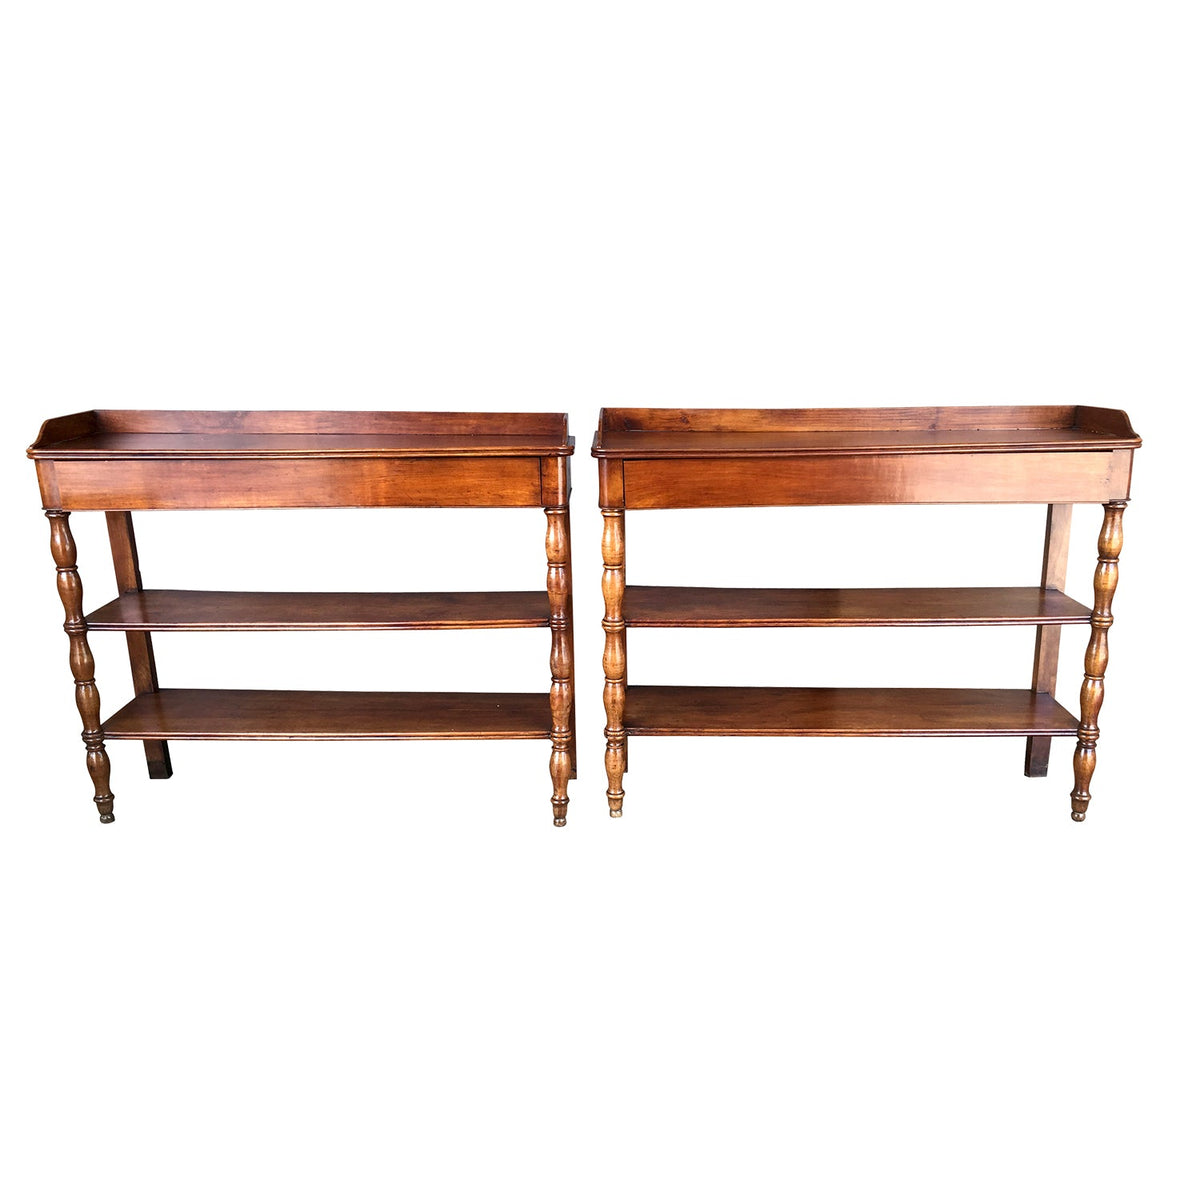 Pair of Antique French Etageres